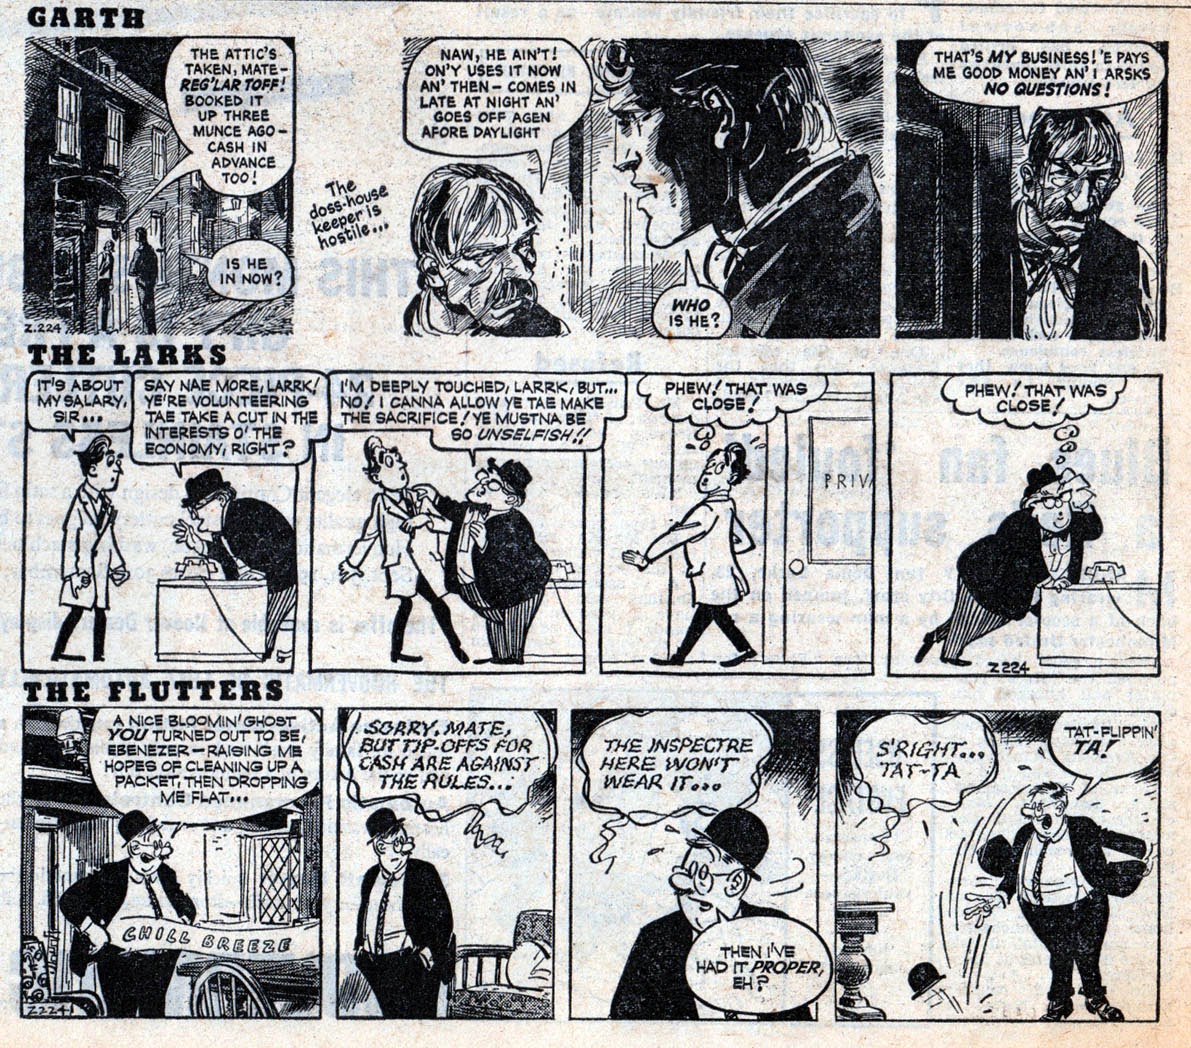 BLIMEY! The Blog of British Comics: Daily Mirror strips of the 1960s